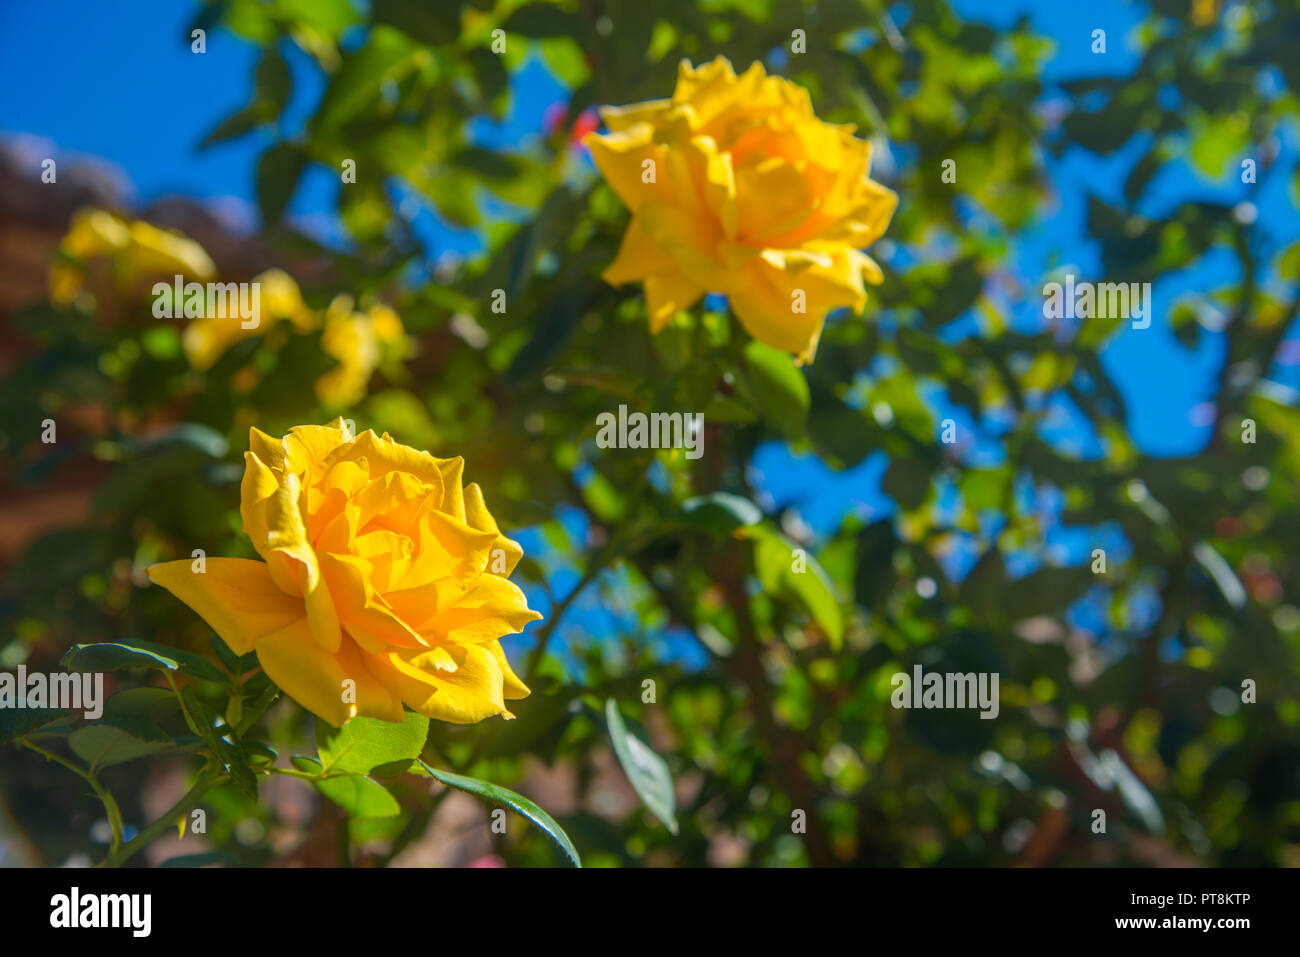 Two yellow roses Stock Photo